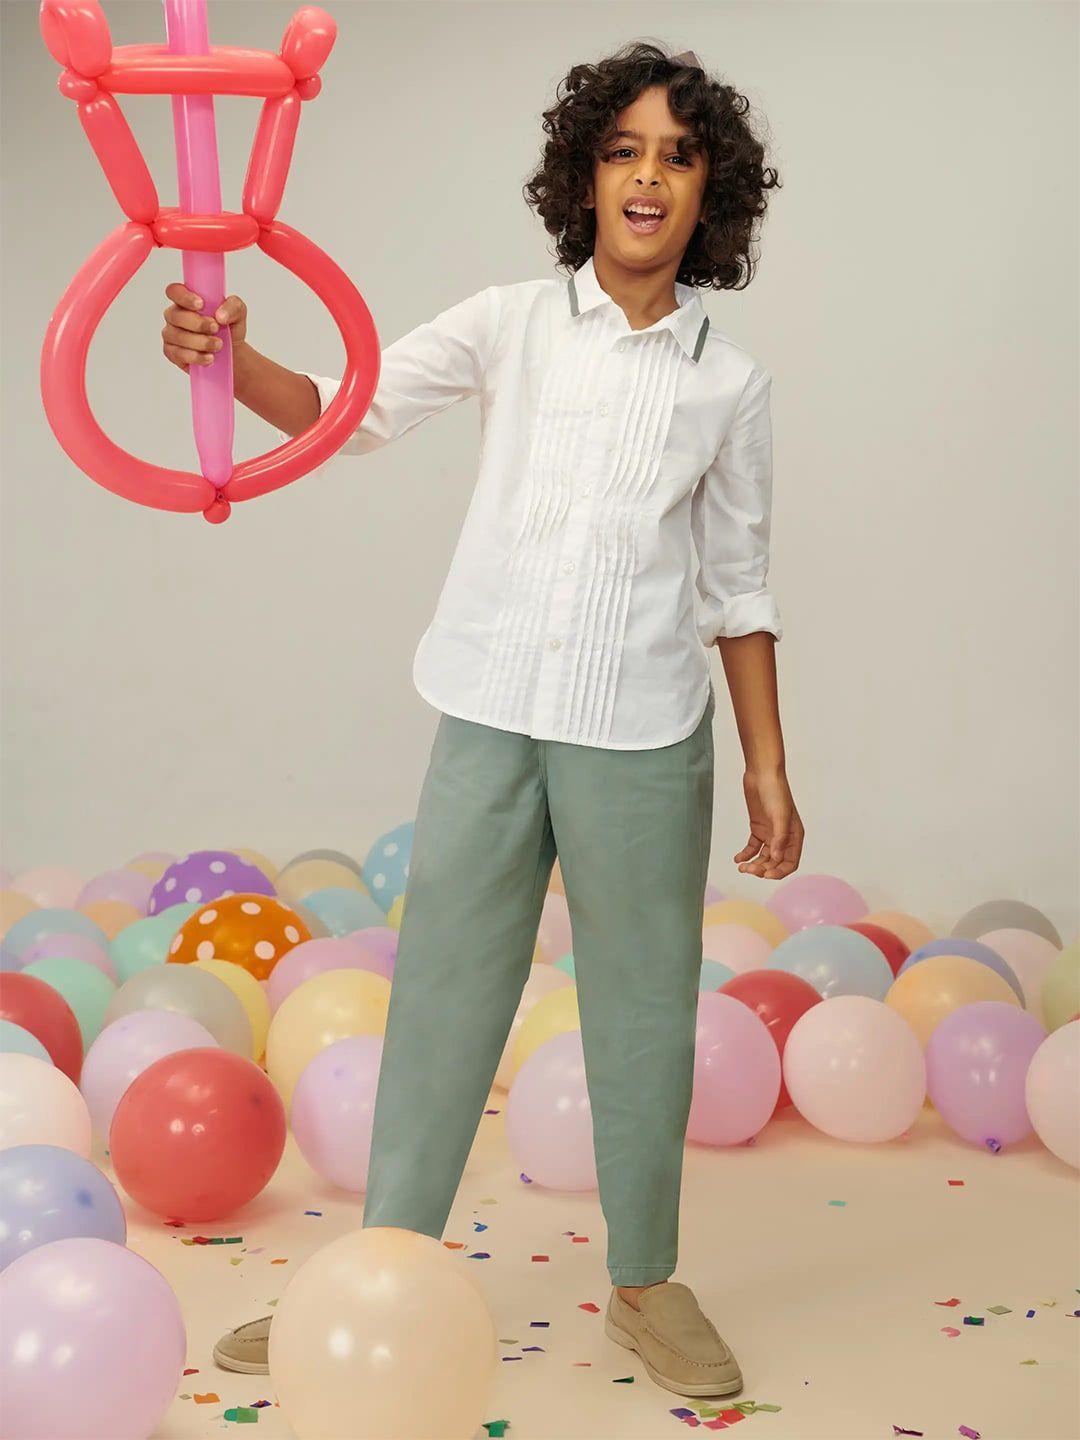 somersault boys shirt with trousers